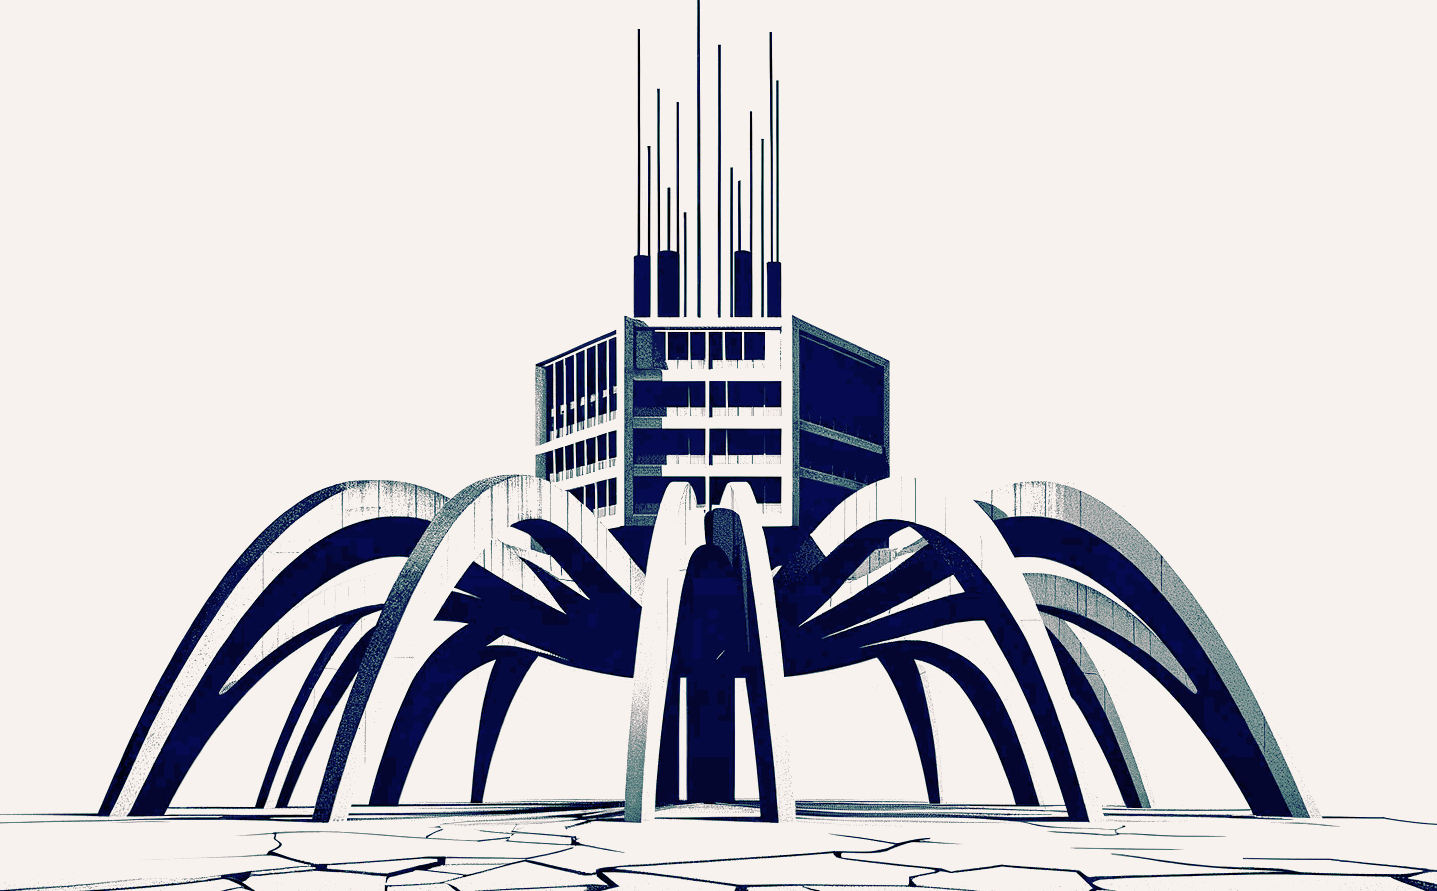 Brutalist architecture representing a single perceptron. A hexagonal building in the center representing the unit itself, with multiple arc legs representing the input weights, and antennas projecting off the top representing the output. High contrast, monochromatic, minimalistic, in the style of vector svg art.